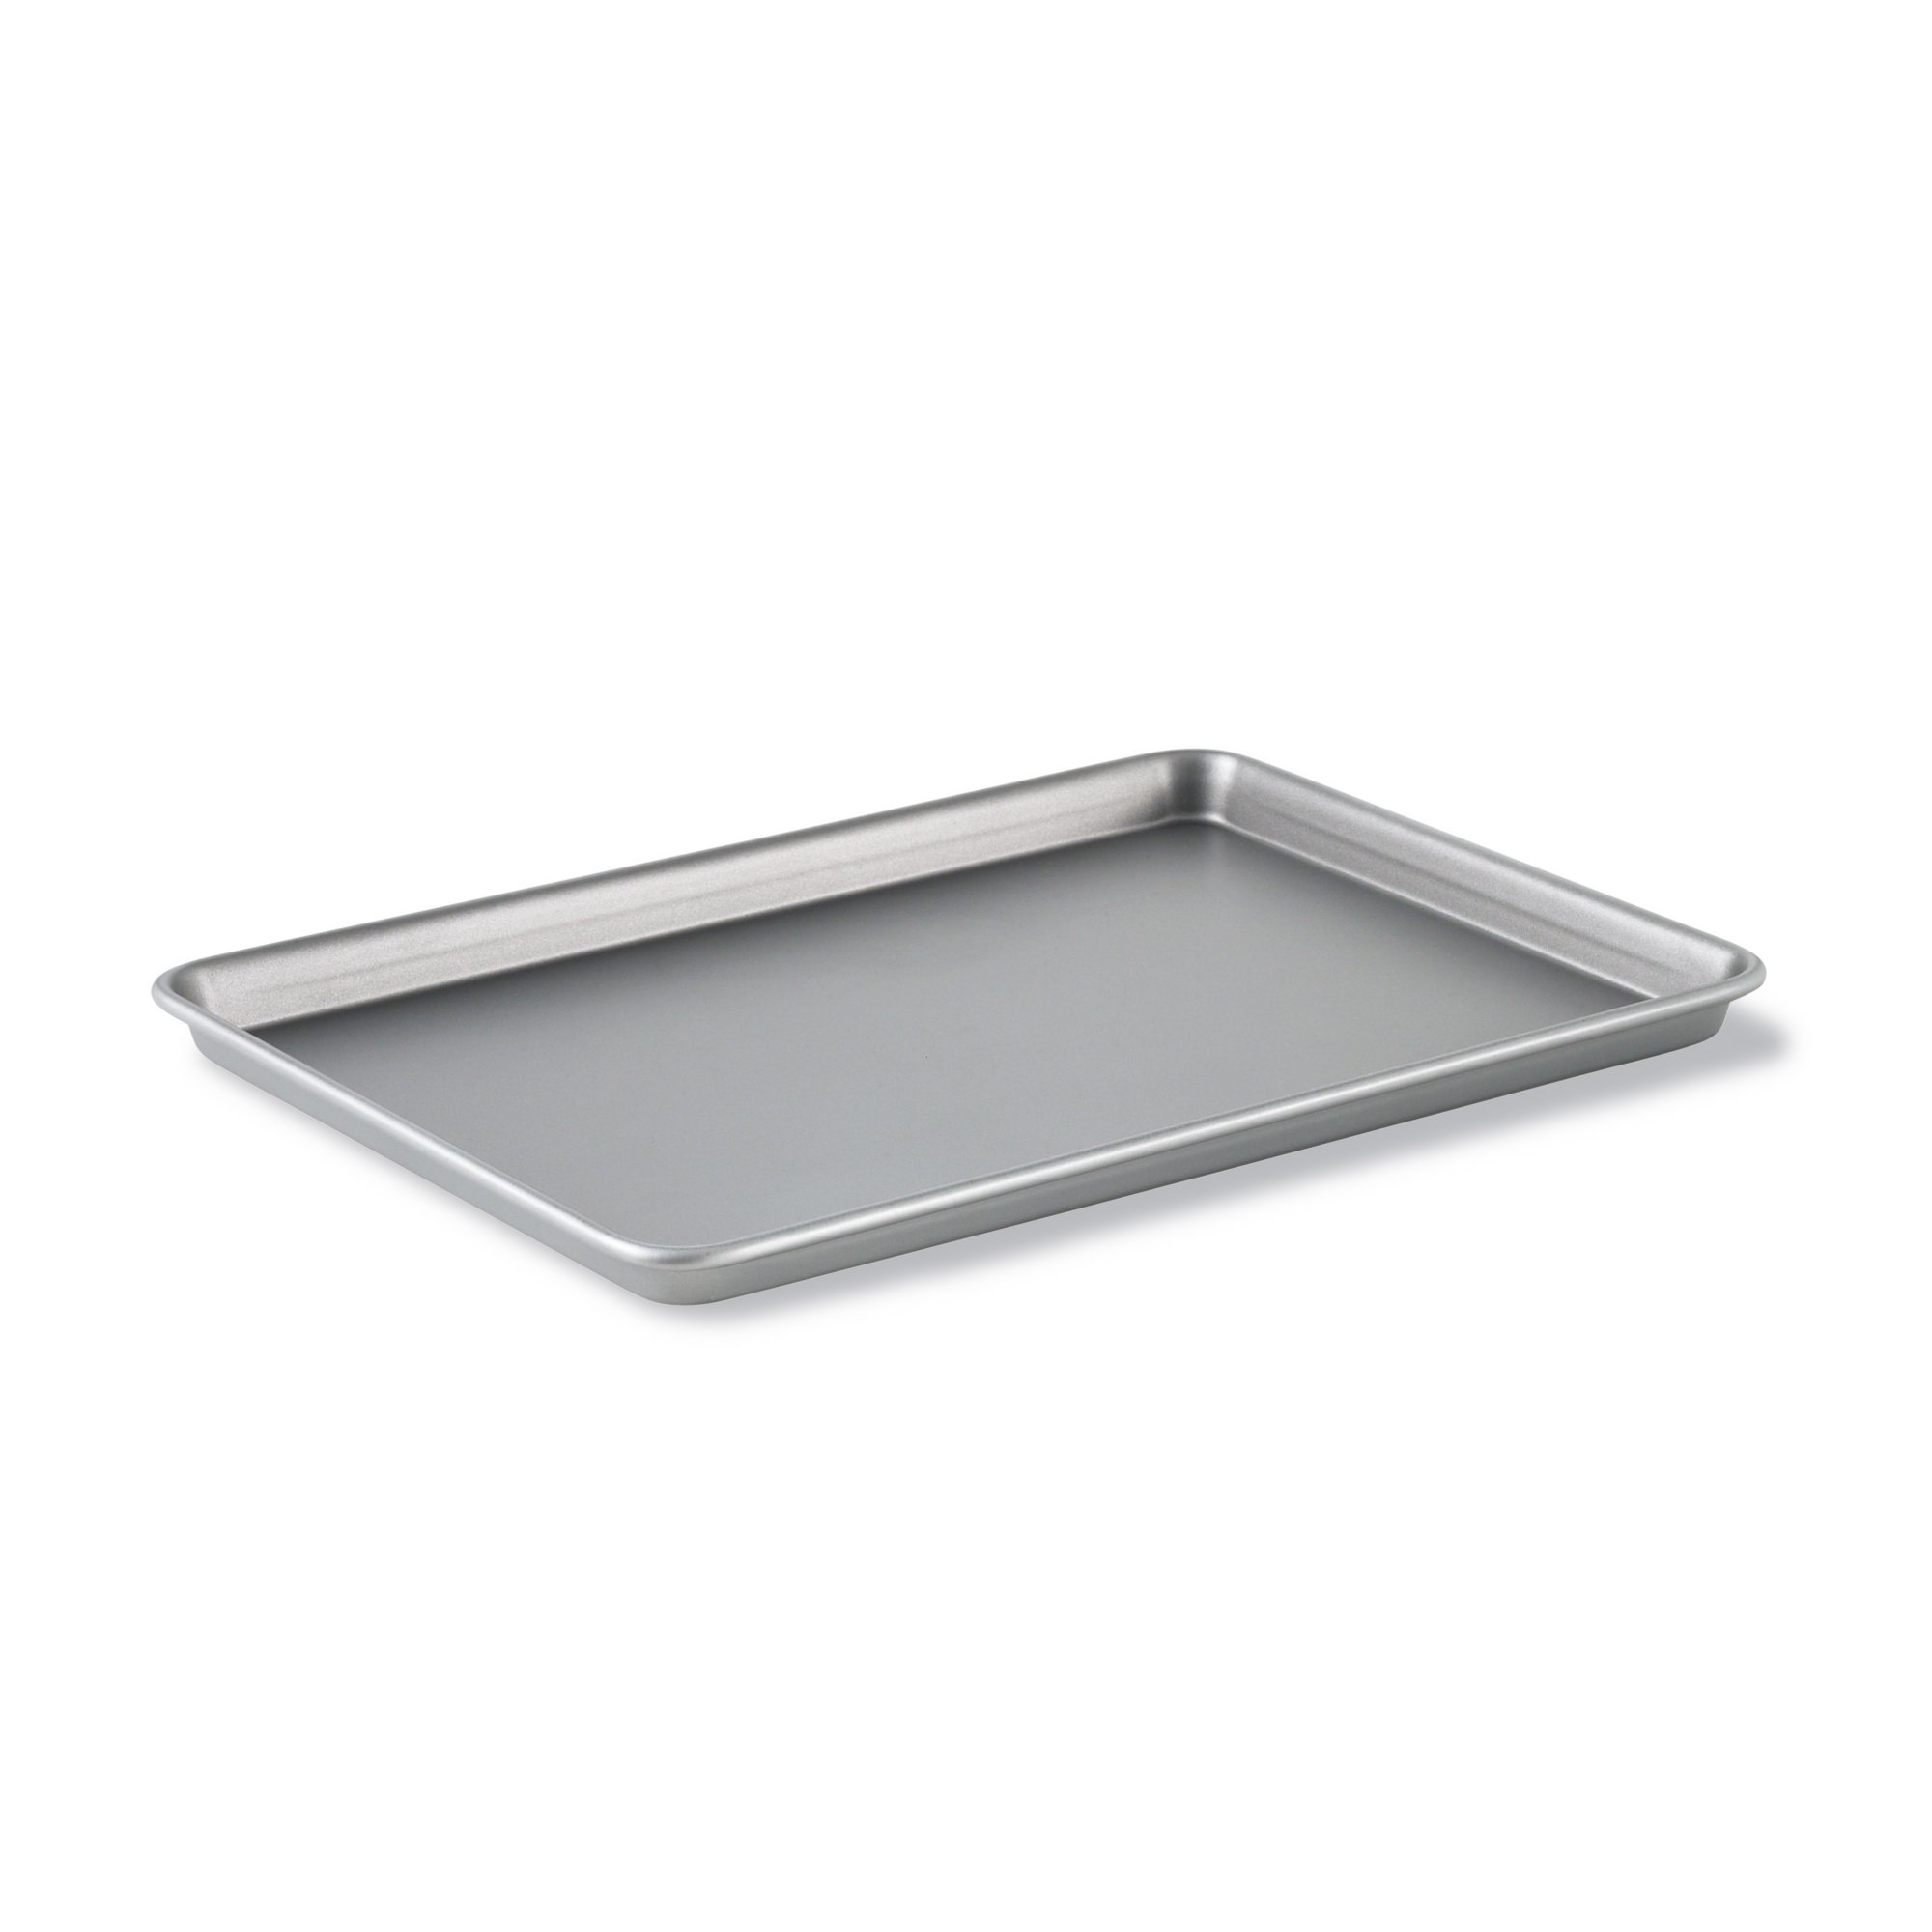 Stainless Steel Bake and Roast Pan 9x13 Made in USA by 360